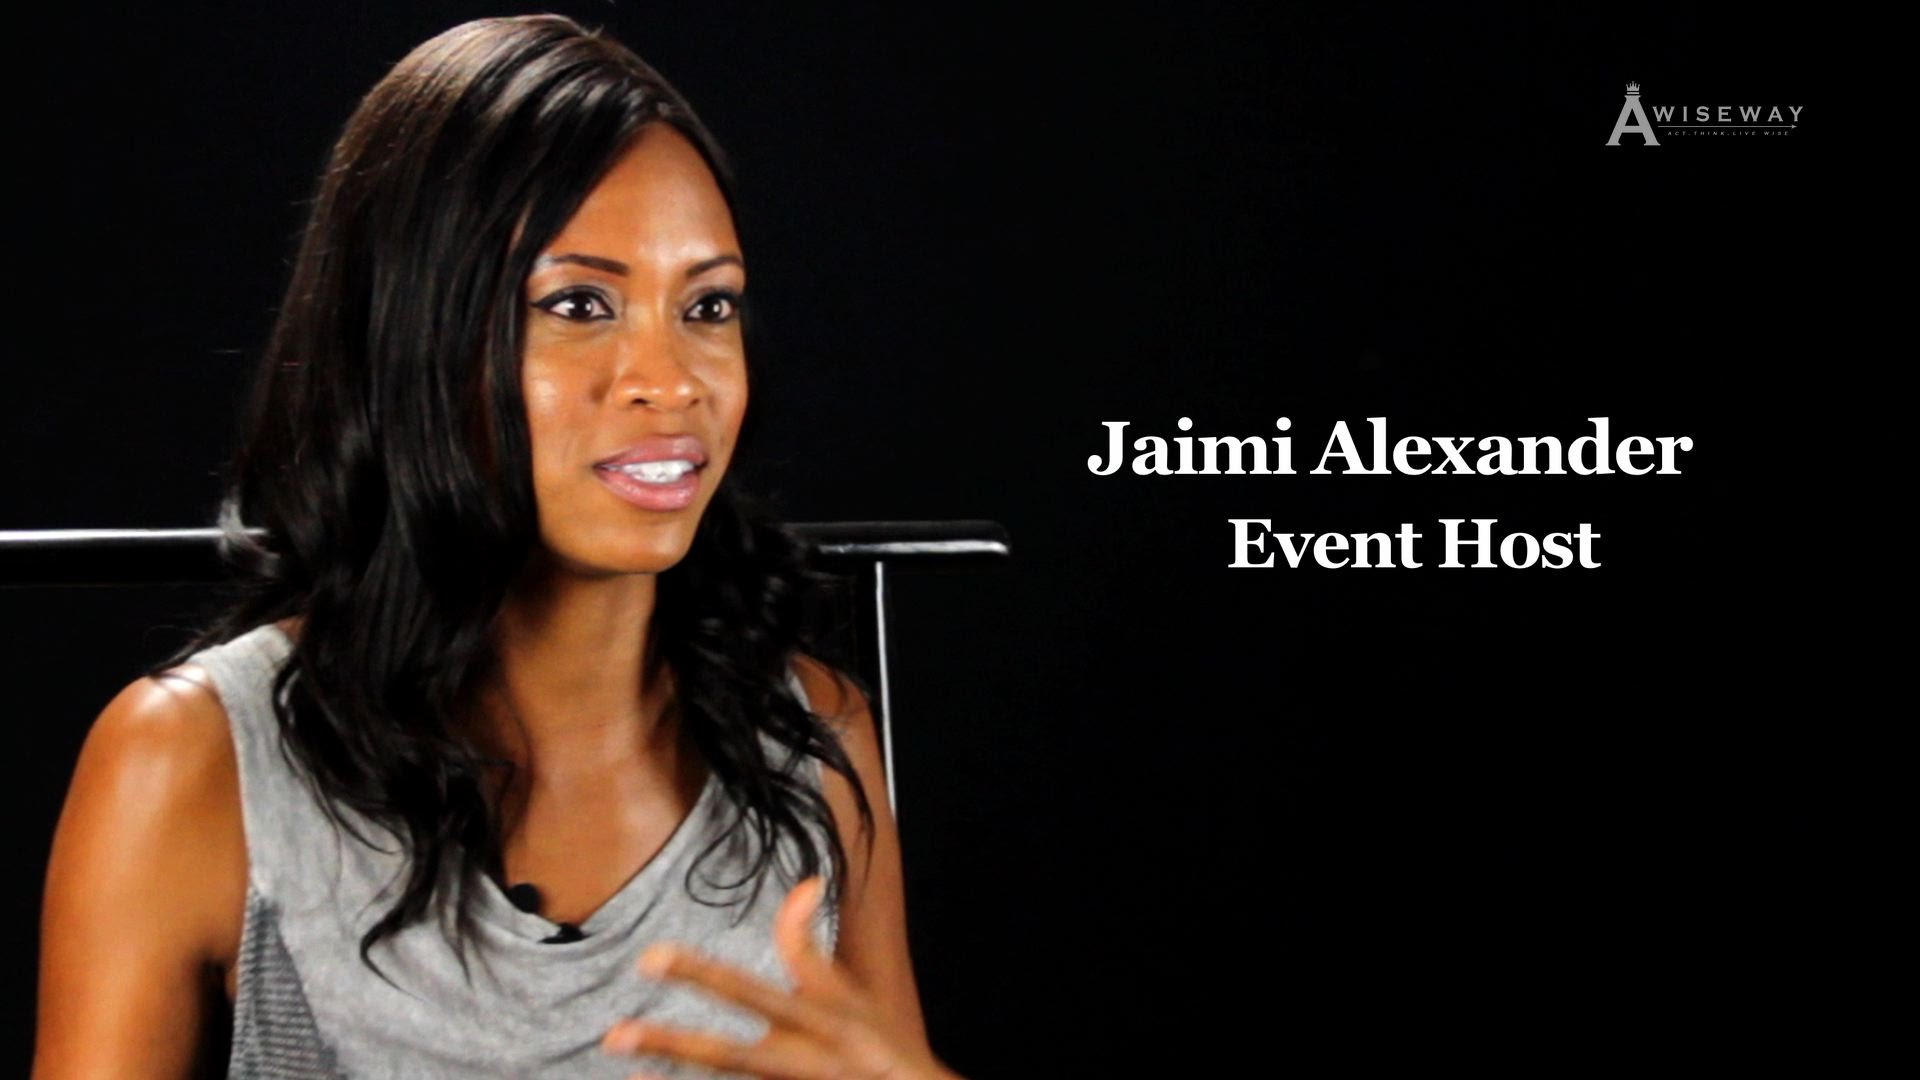 Event Host Discusses How We Change Negative Thoughts and Emotions